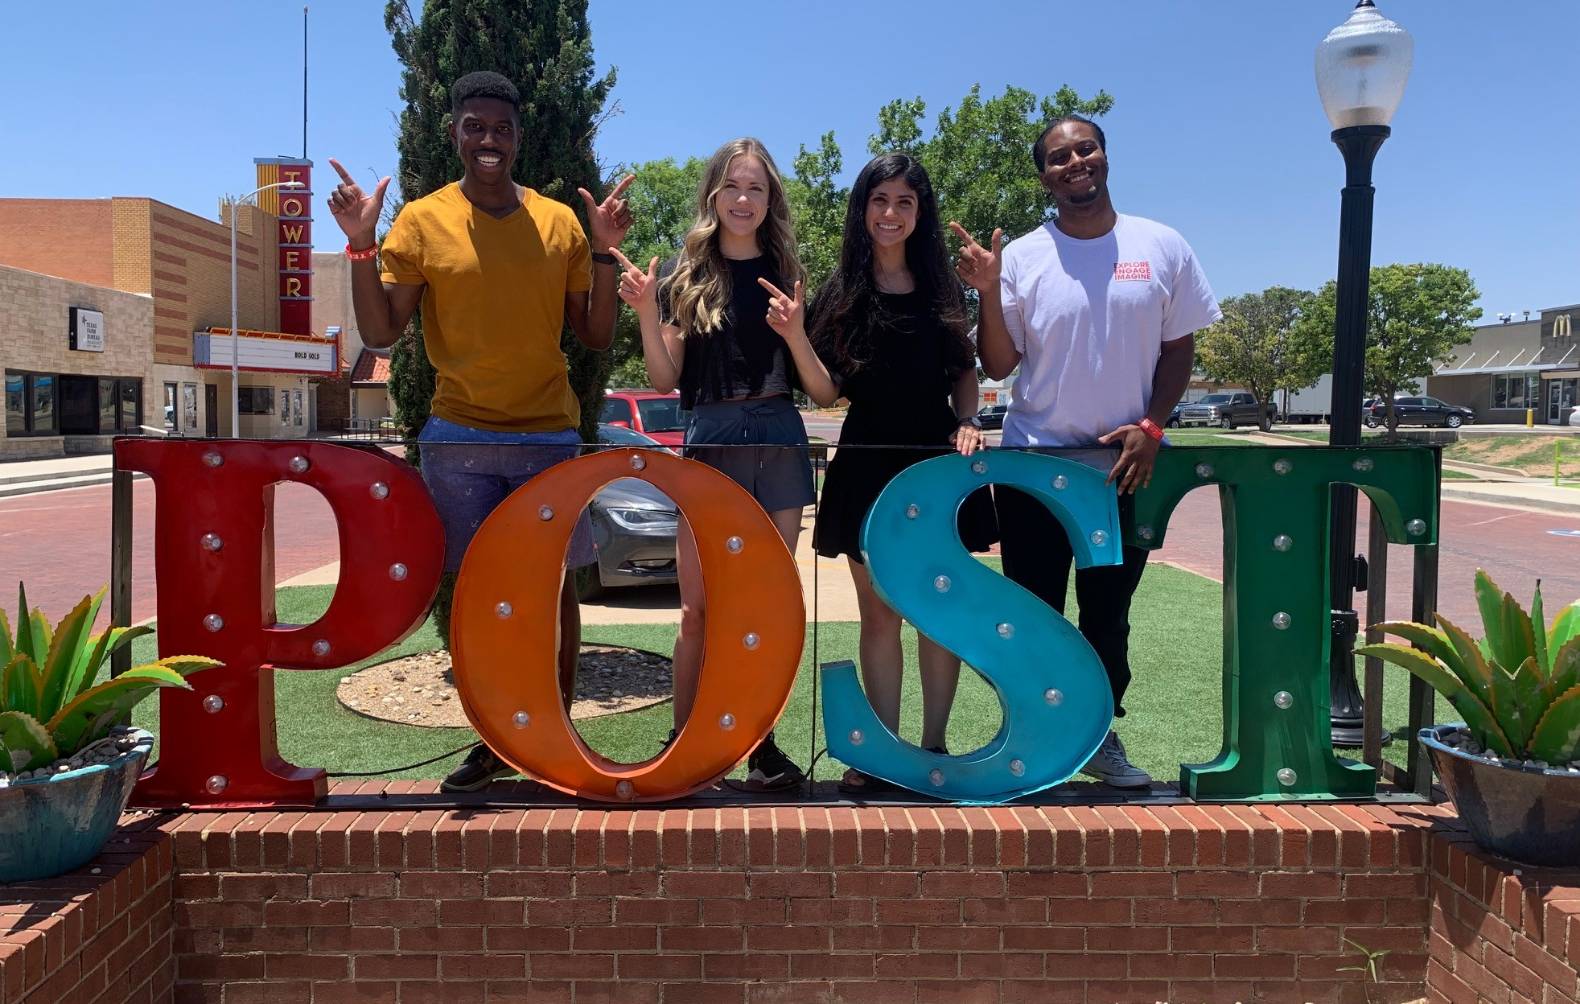 Image of Student Government Officers behind the Post, Texas sign, taken during their officer retreat